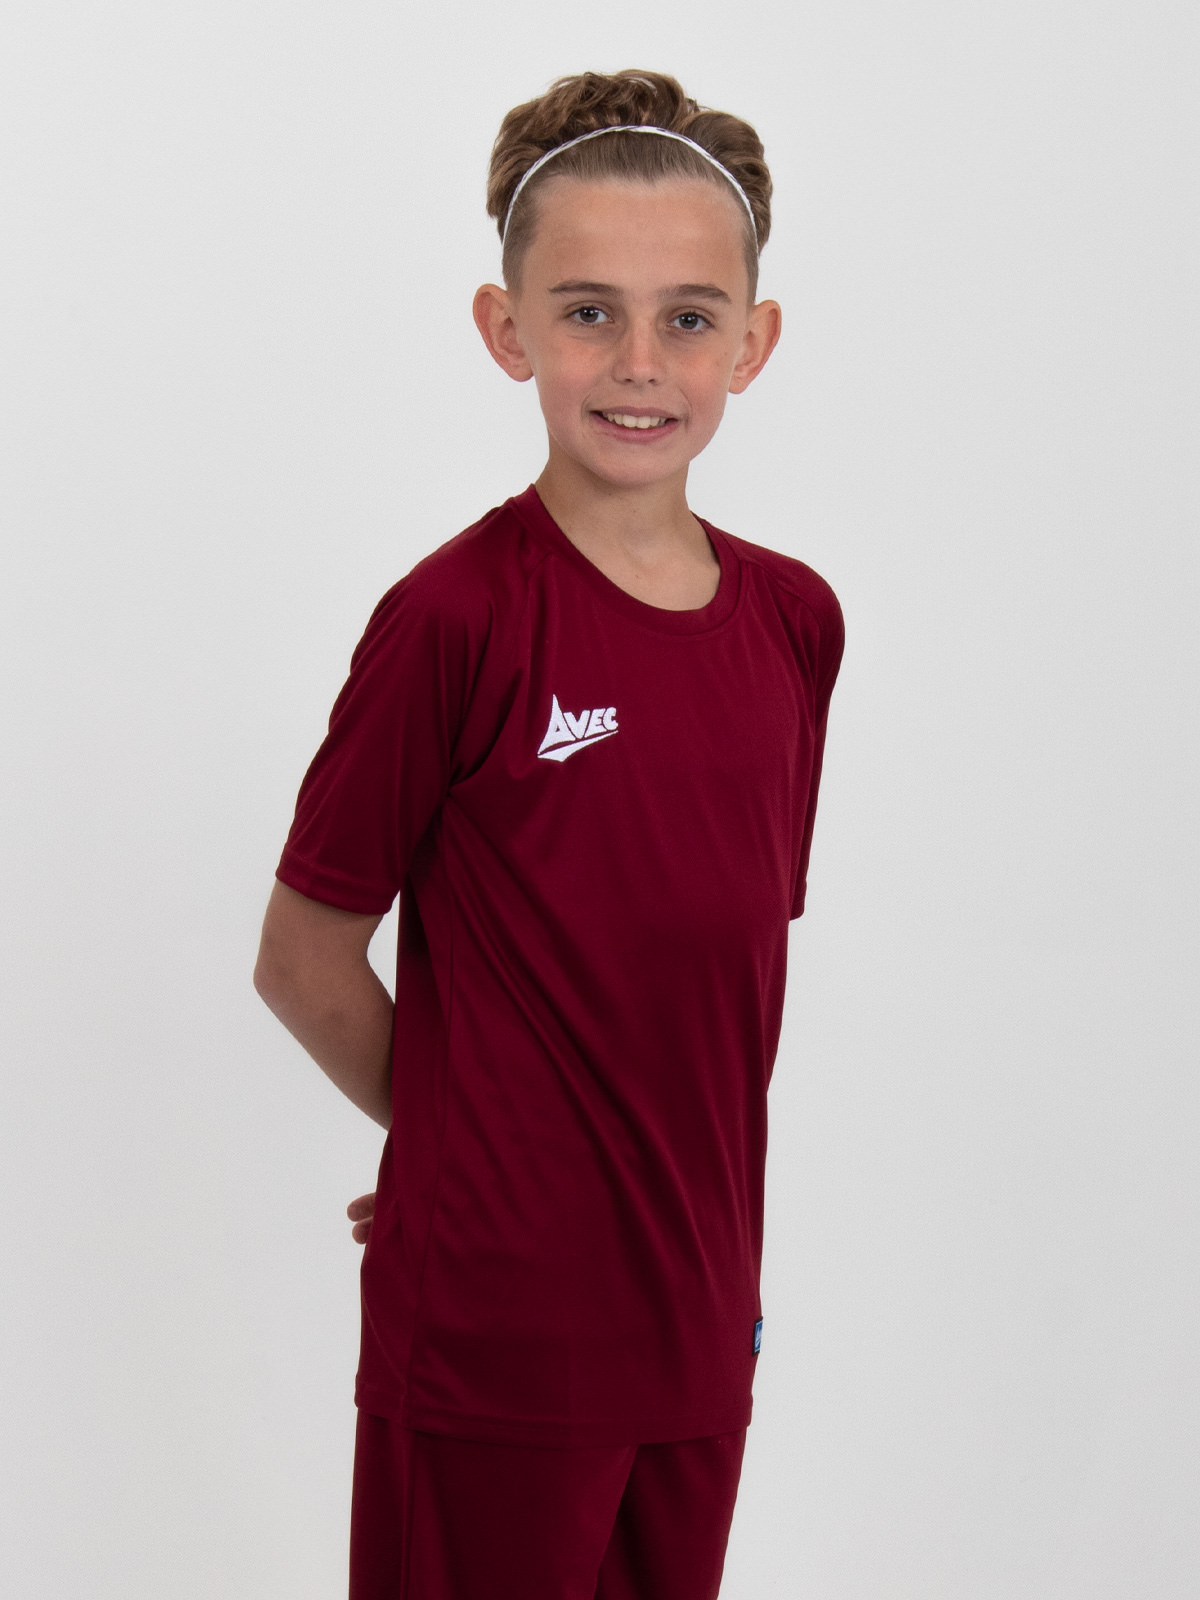 a children's claret football shirt is being worn by a young boy.